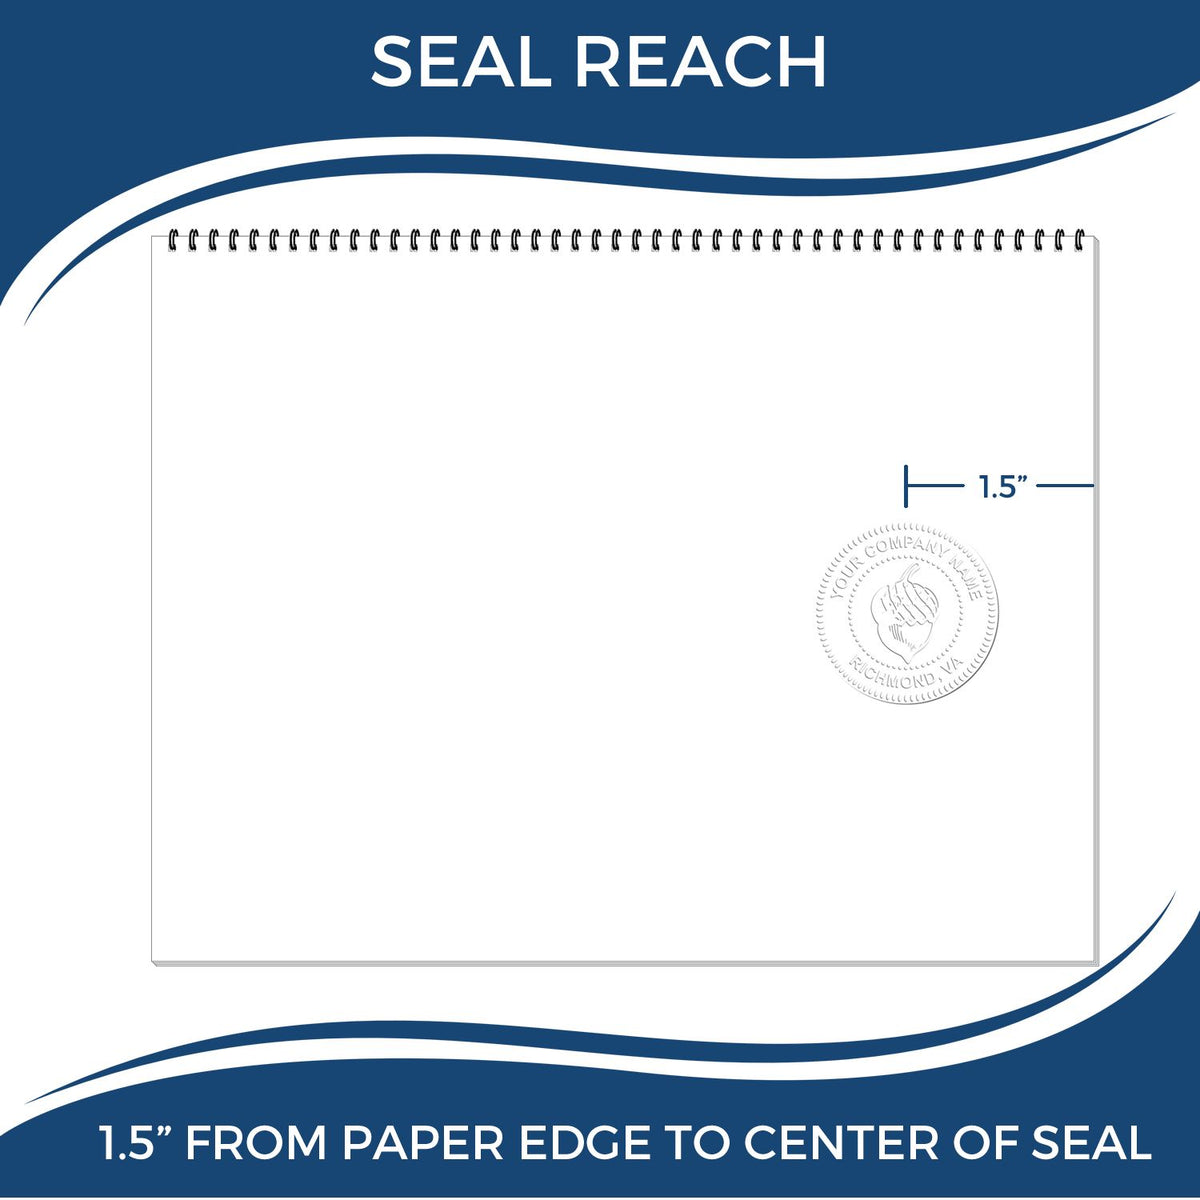 An infographic showing the seal reach which is represented by a ruler and a miniature seal image of the Hybrid Kentucky Engineer Seal